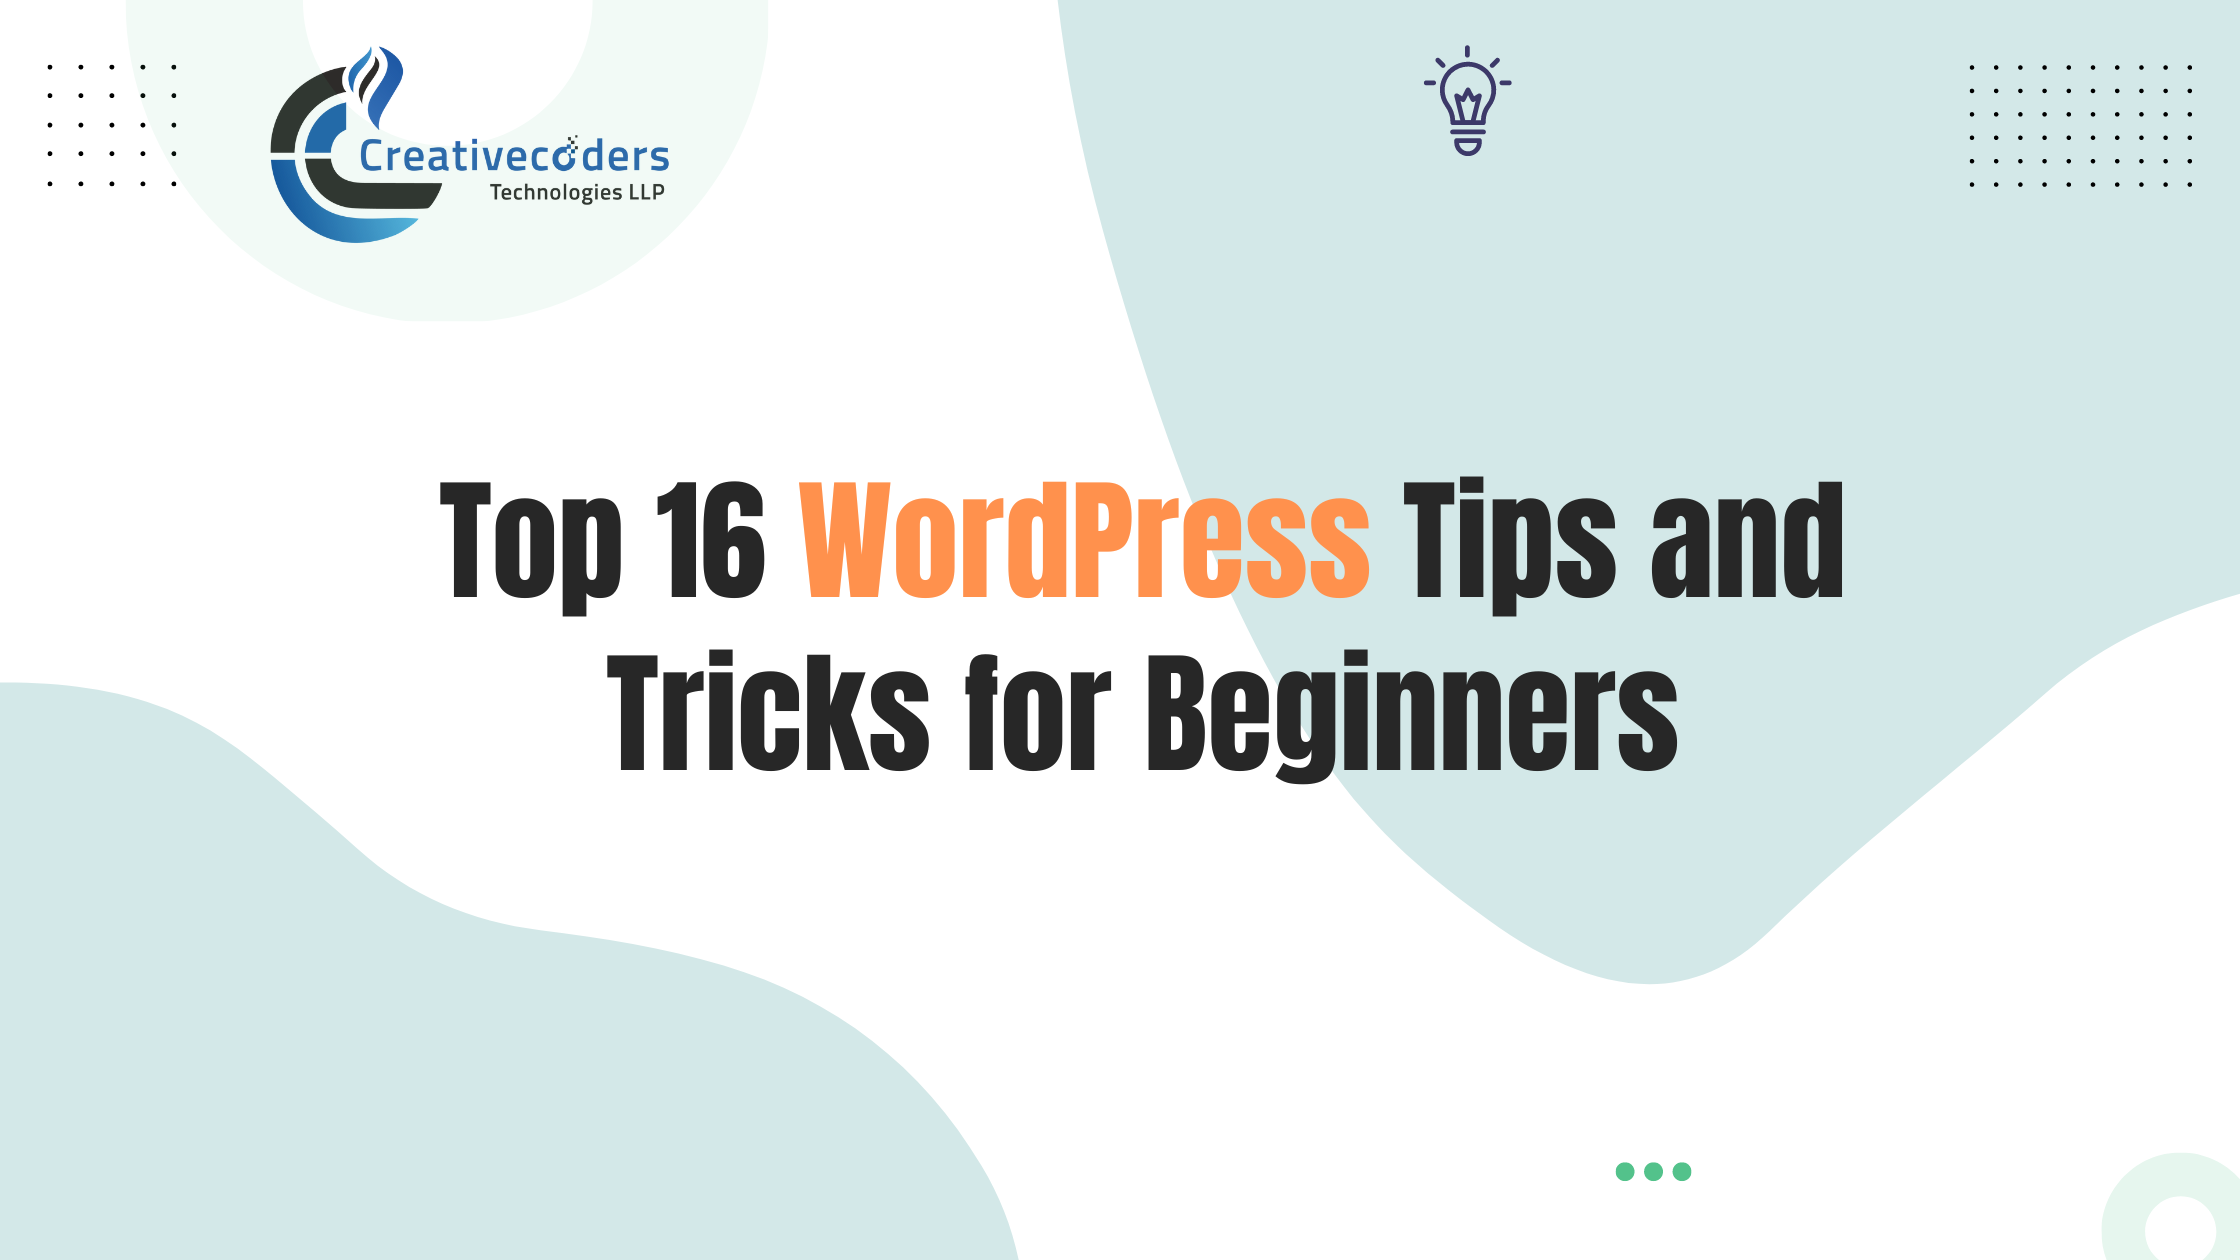 Top 16 WordPress Tips and Tricks for Beginners